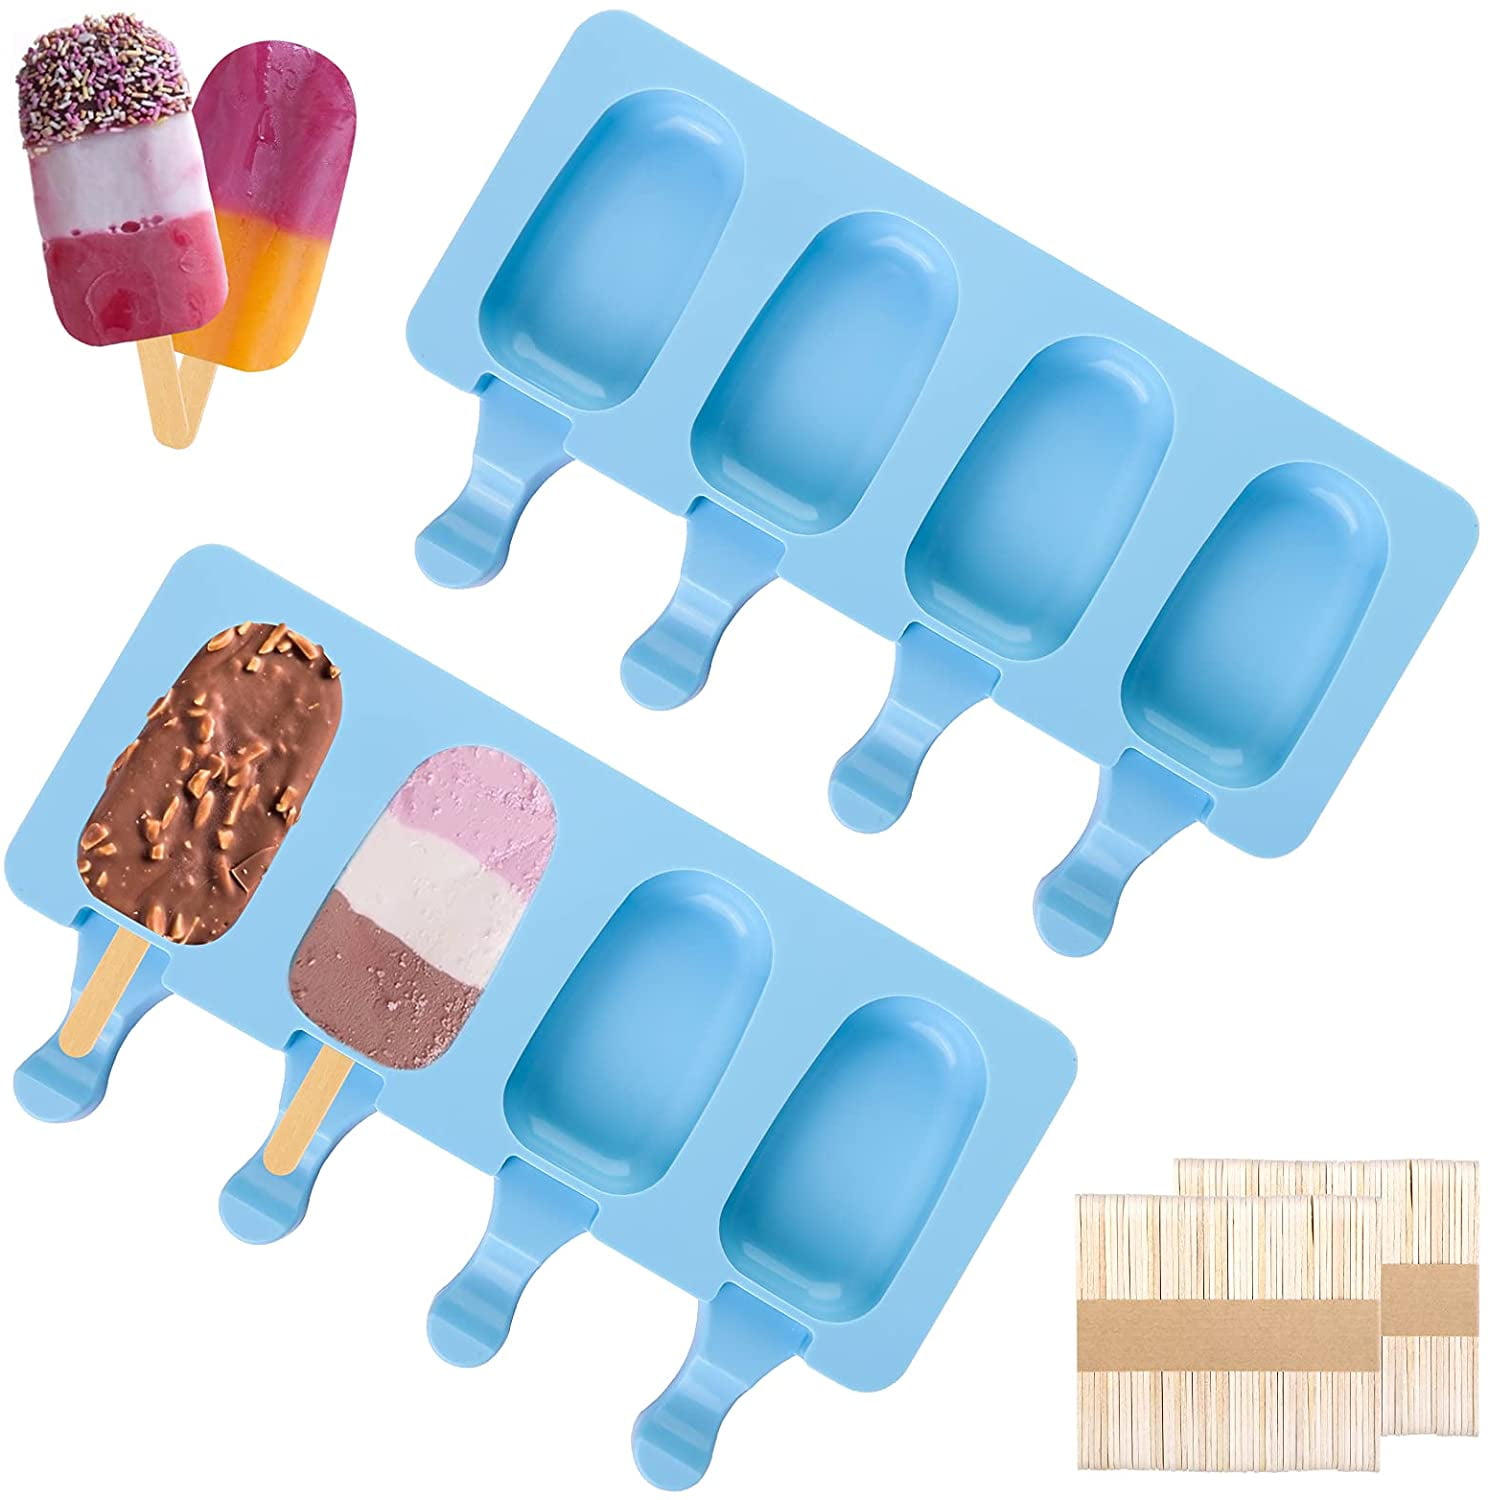 4 Cell Popsicle Molds Silicone DIY Frozen Ice Cream Mold Ice Lolly Pop Maker 